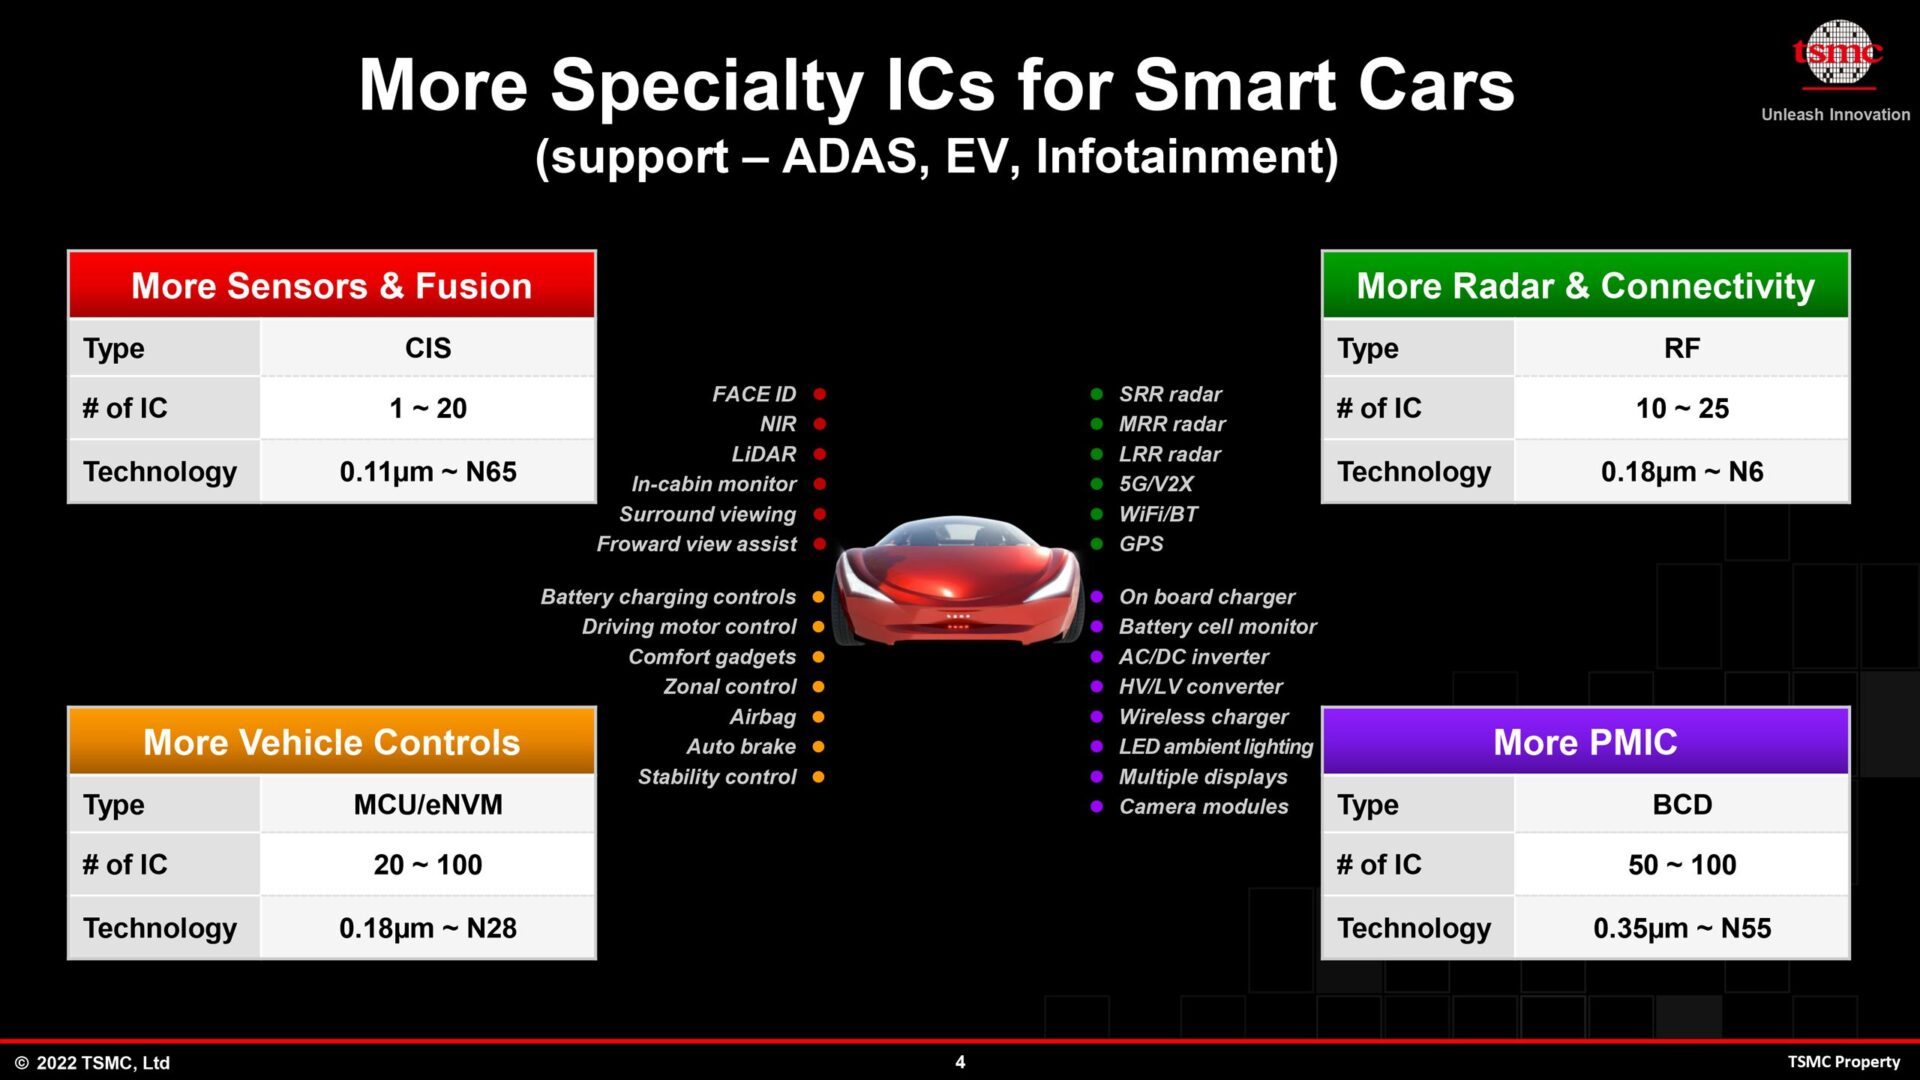 Details on components and target etch fineness of automotive semiconductors according to TSMC.